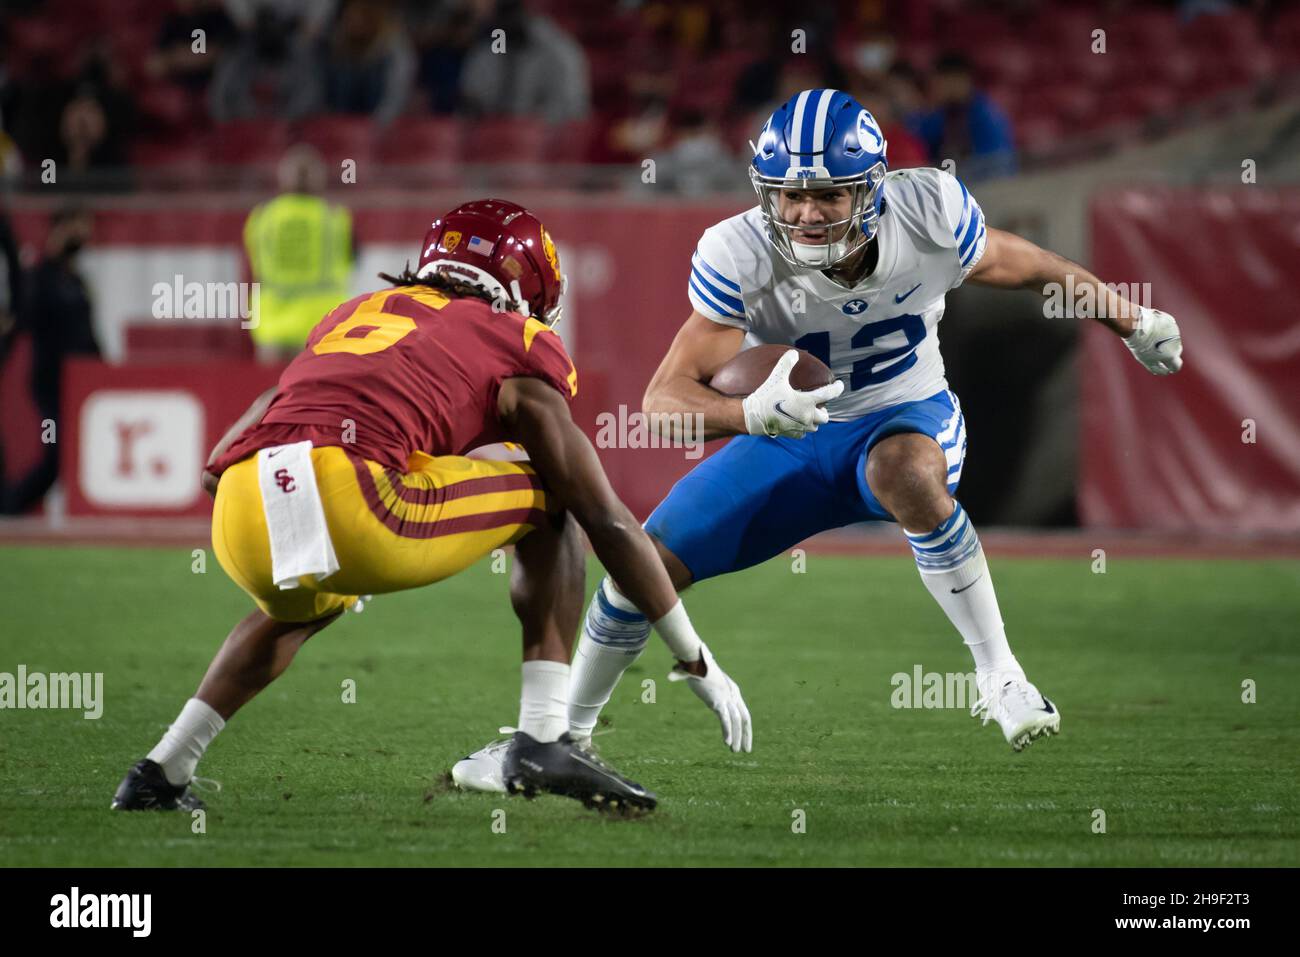 BYU Cougars wide receiver Puka Nacua (12) in action  during an NCAA college football game against the Southern California Trojans. The Cougars defeate Stock Photo